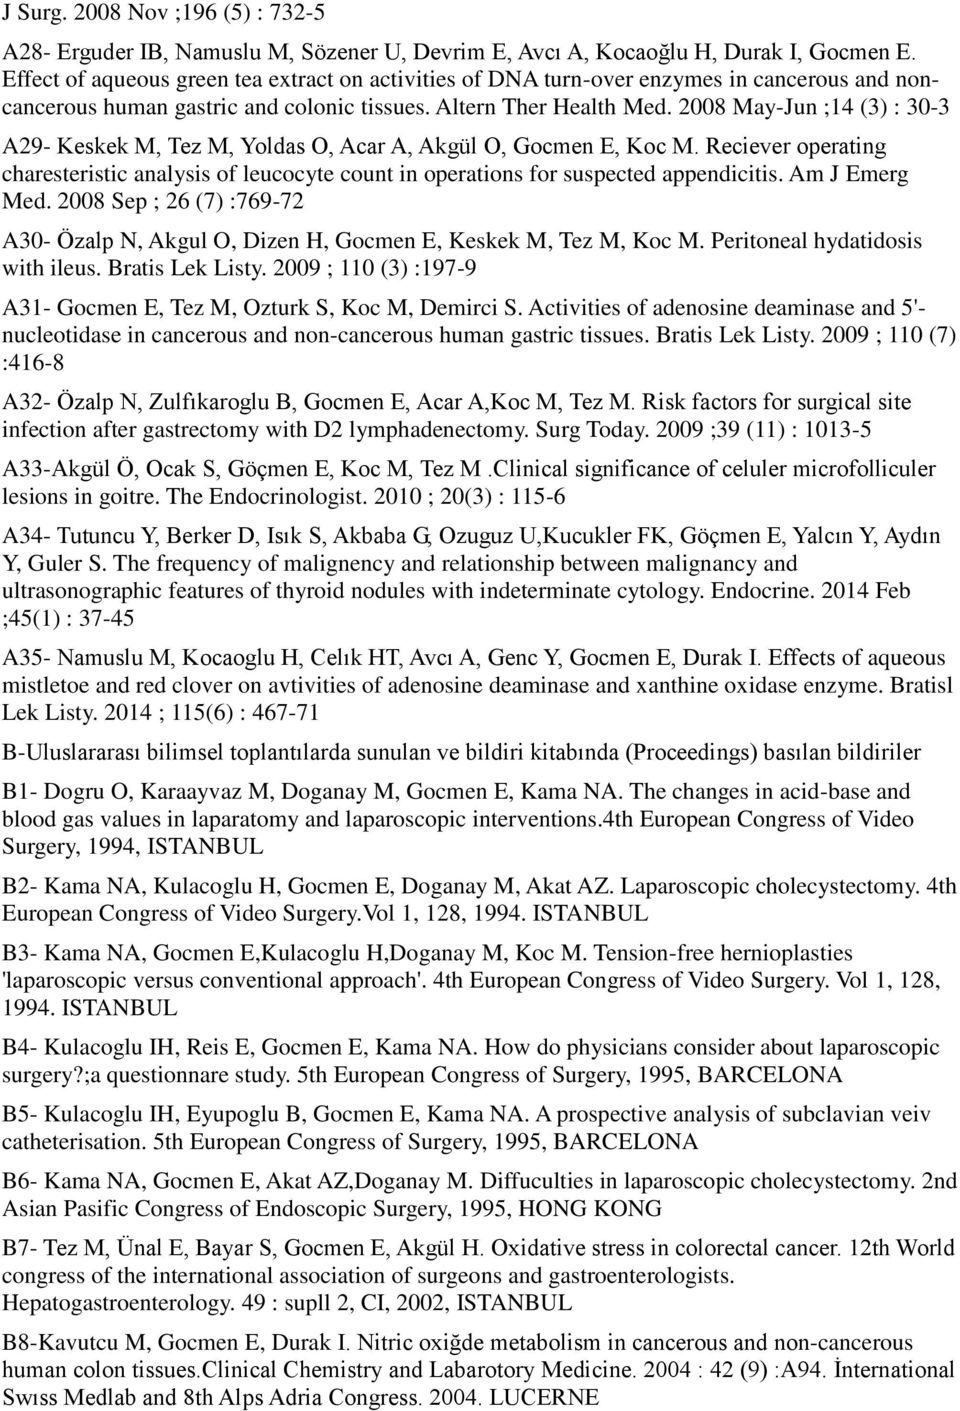 2008 May-Jun ;14 (3) : 30-3 A29- Keskek M, Tez M, Yoldas O, Acar A, Akgül O, Gocmen E, Koc M. Reciever operating charesteristic analysis of leucocyte count in operations for suspected appendicitis.